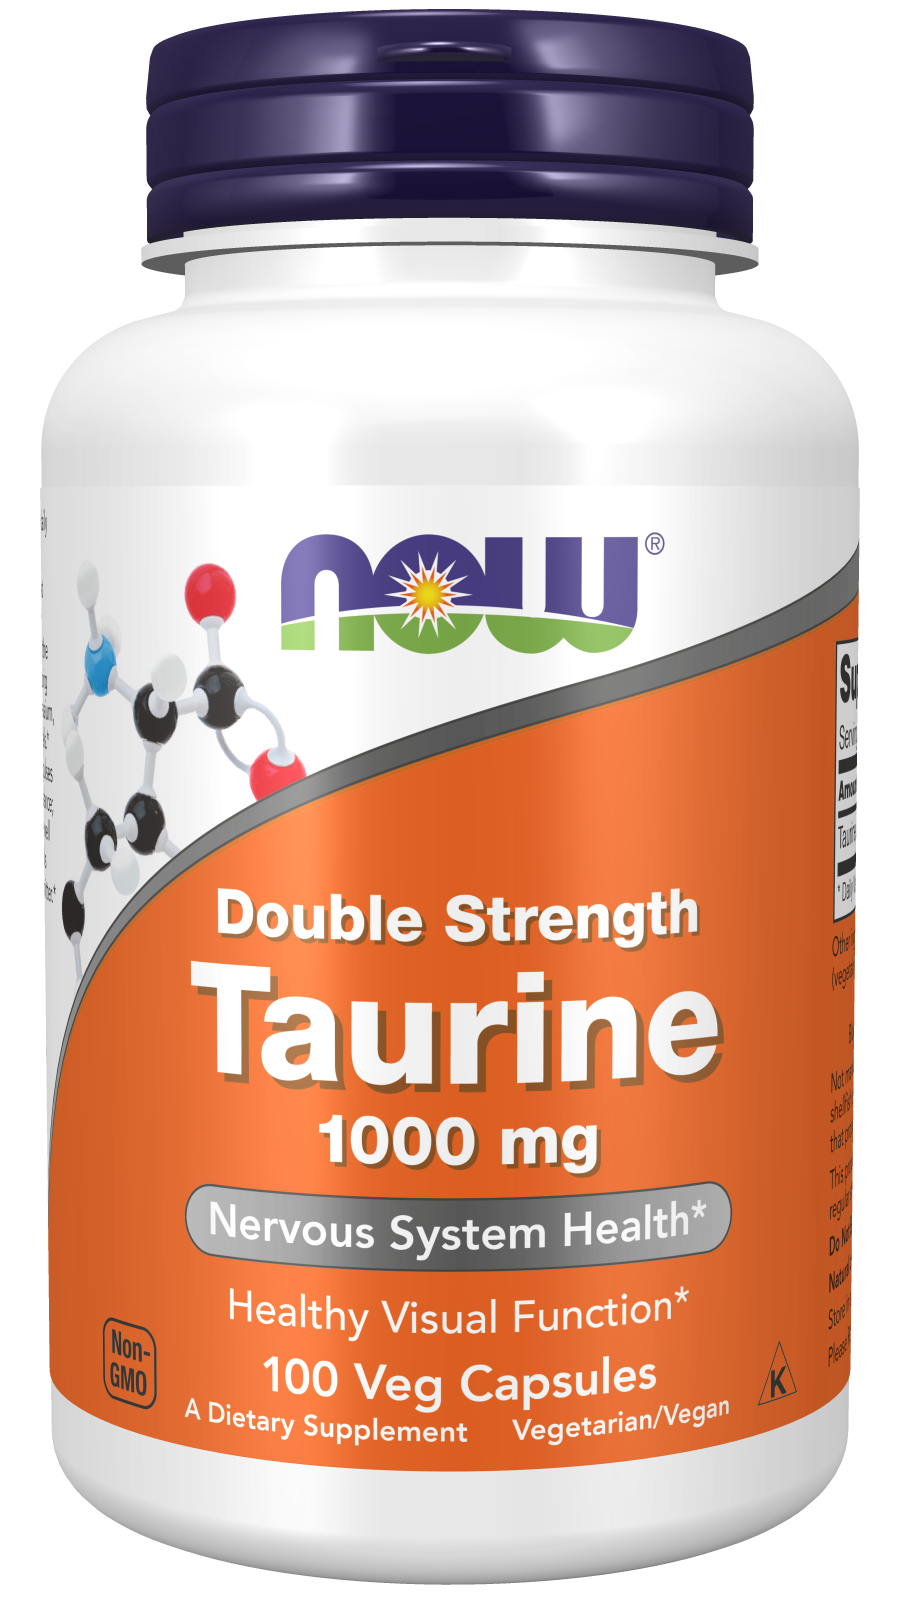 Taurine, Double Strength 1000 mg - 100 Veg Capsules Bottle Front